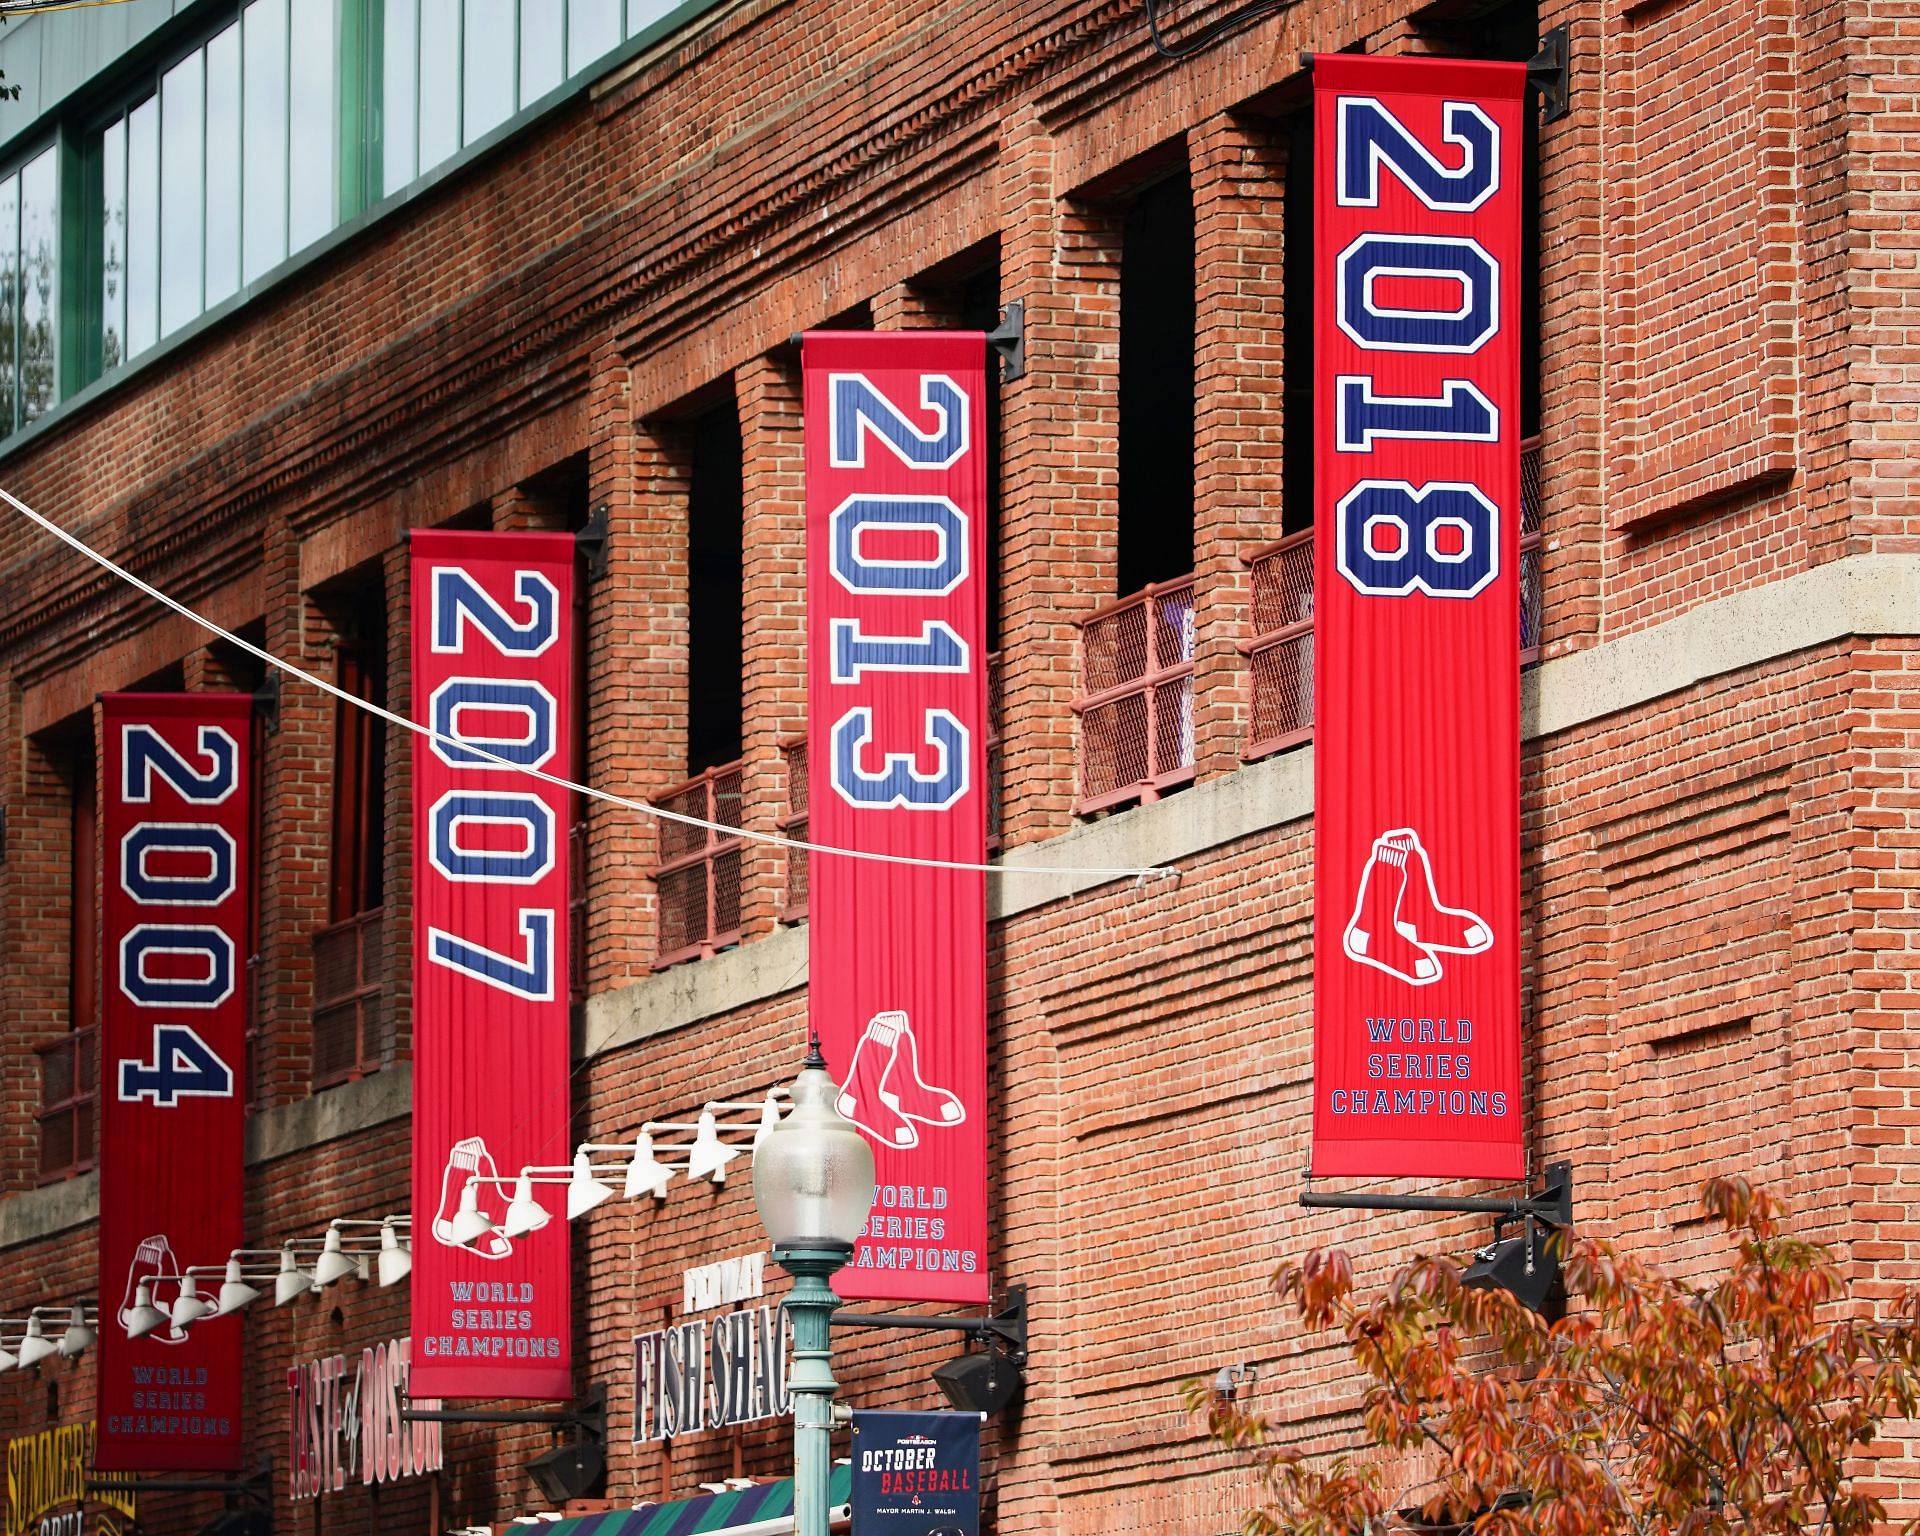 The Boston Red Sox 2018 World Series Championship banner hangs outside Fenway Park